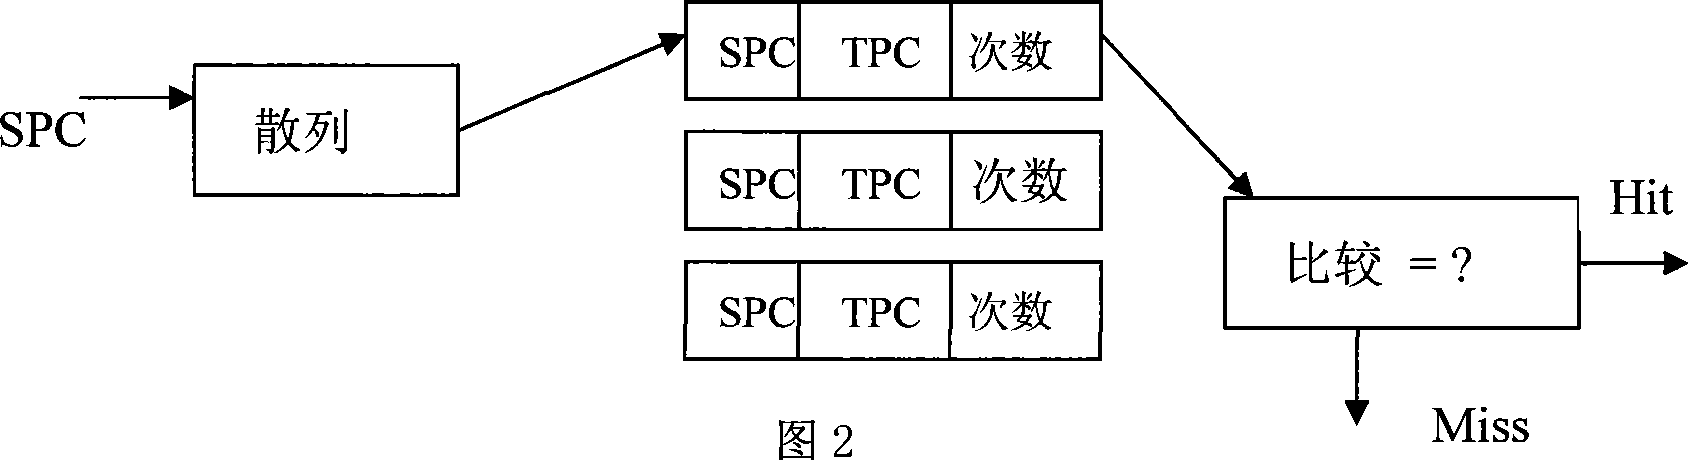 Dynamic binary translation method for cooperation design of software and hardware